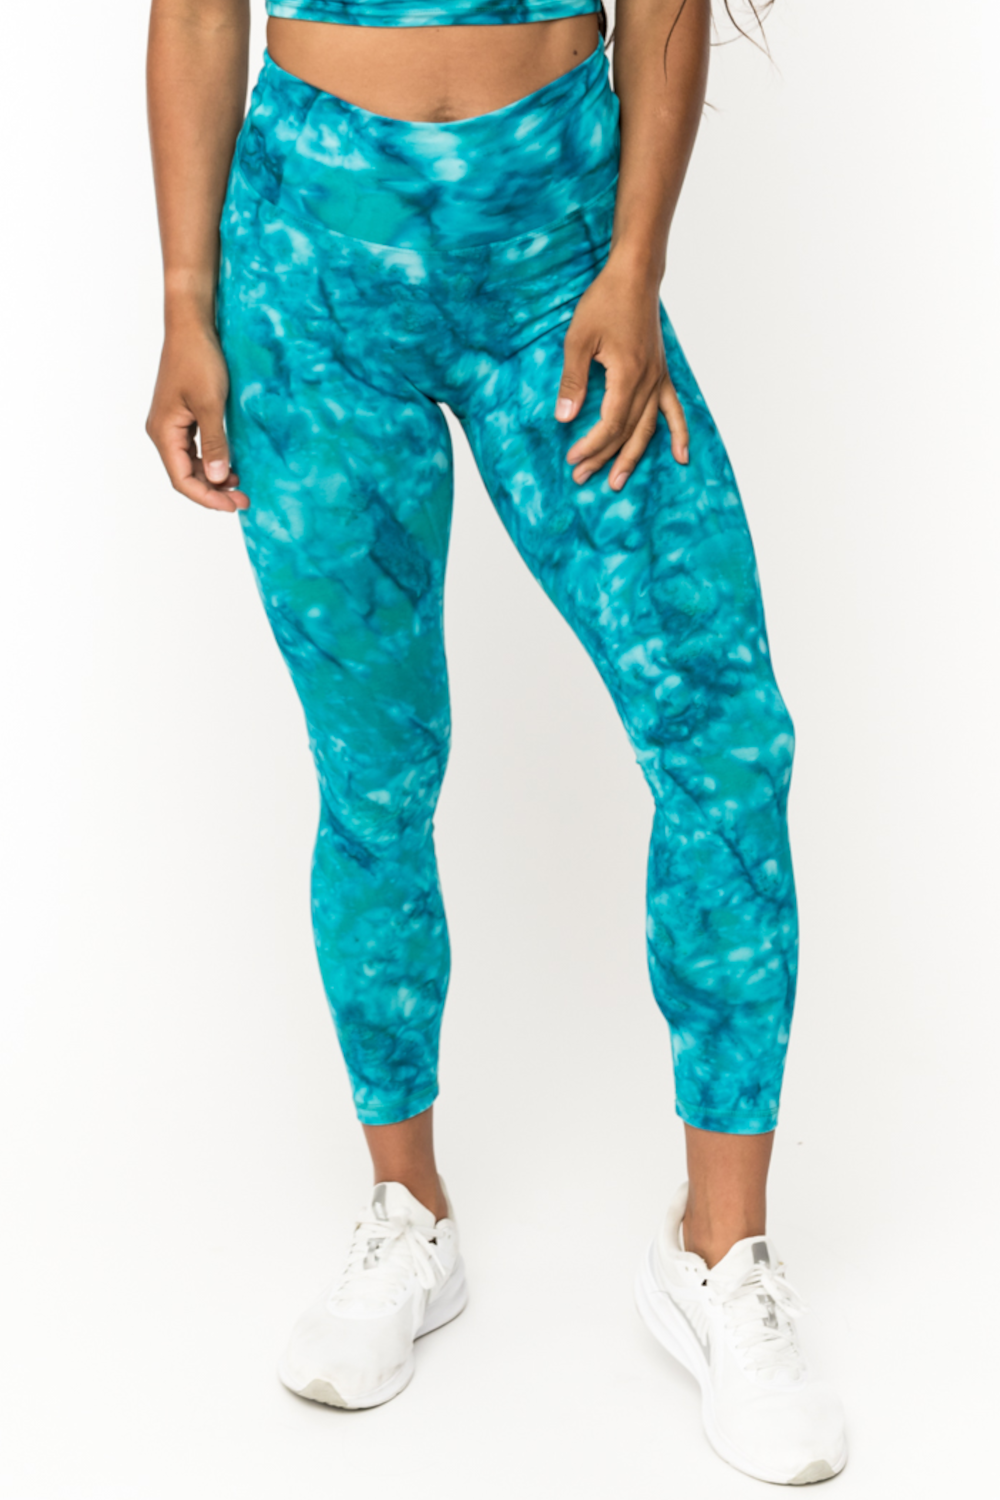 Leggings - Bali Chill Out Seamist